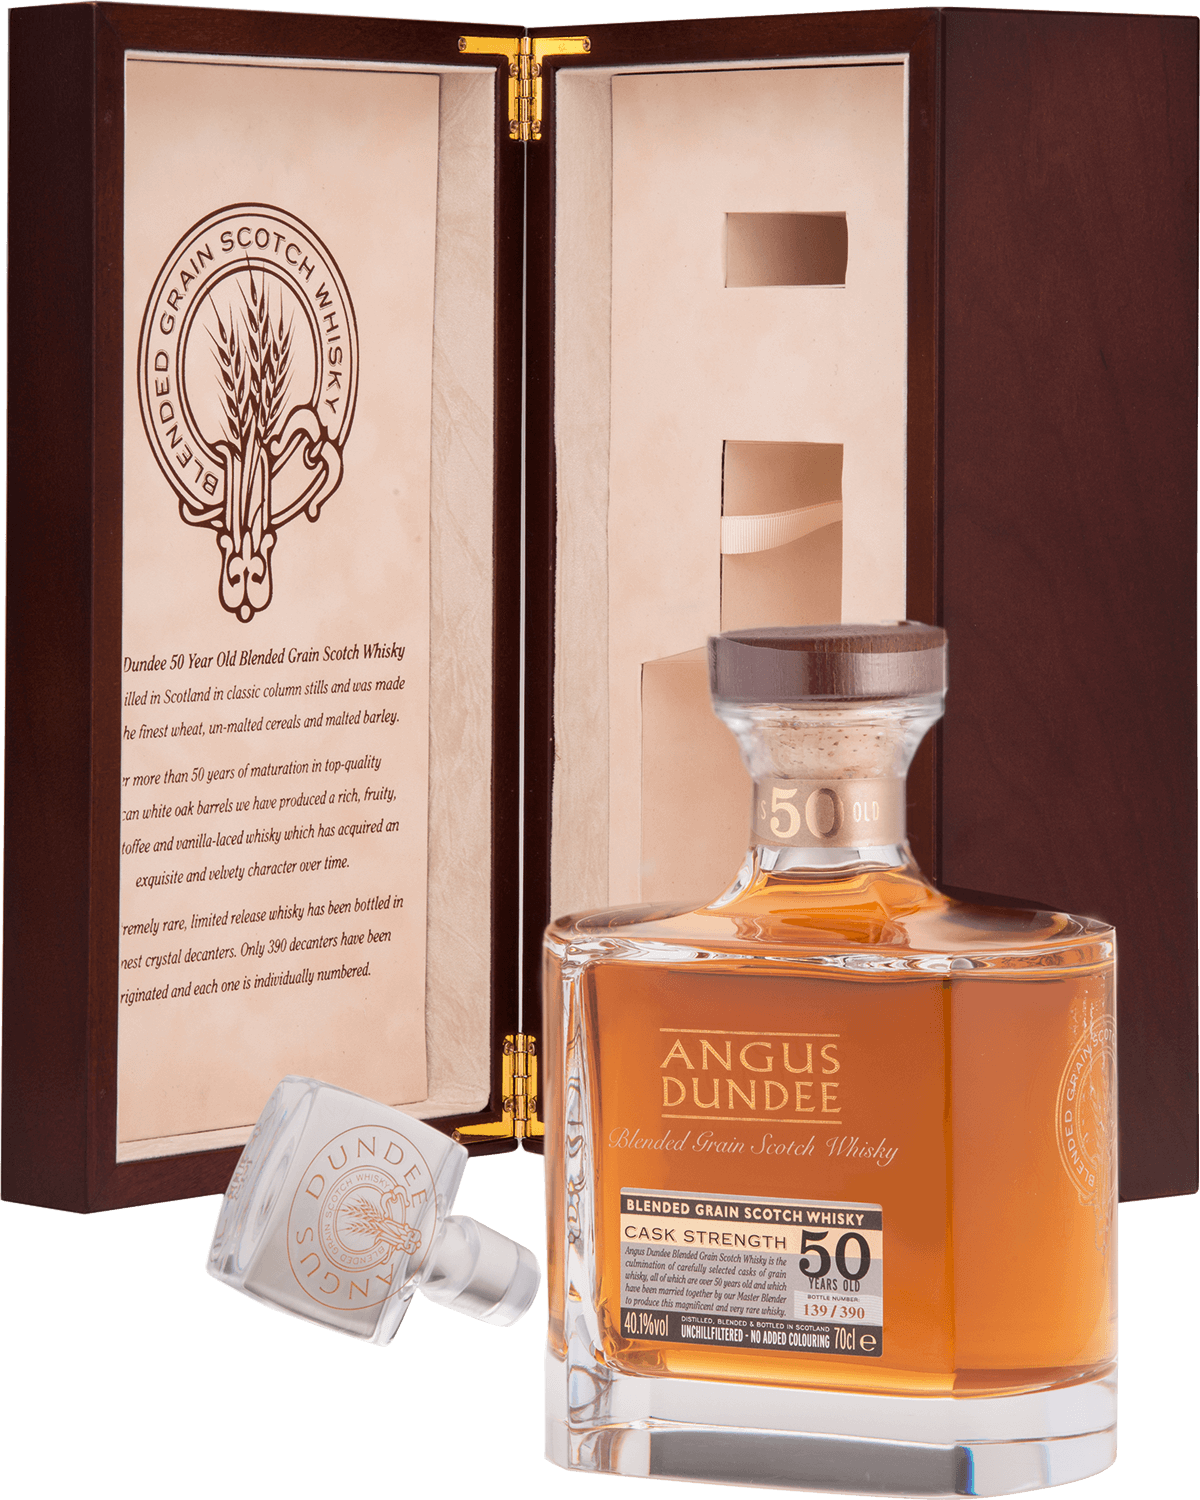 Angus Dundee Cask Strength Blended Grain Scotch Whisky 50 y.o. (gift box) grant s ale cask finish blended scotch whisky gift box